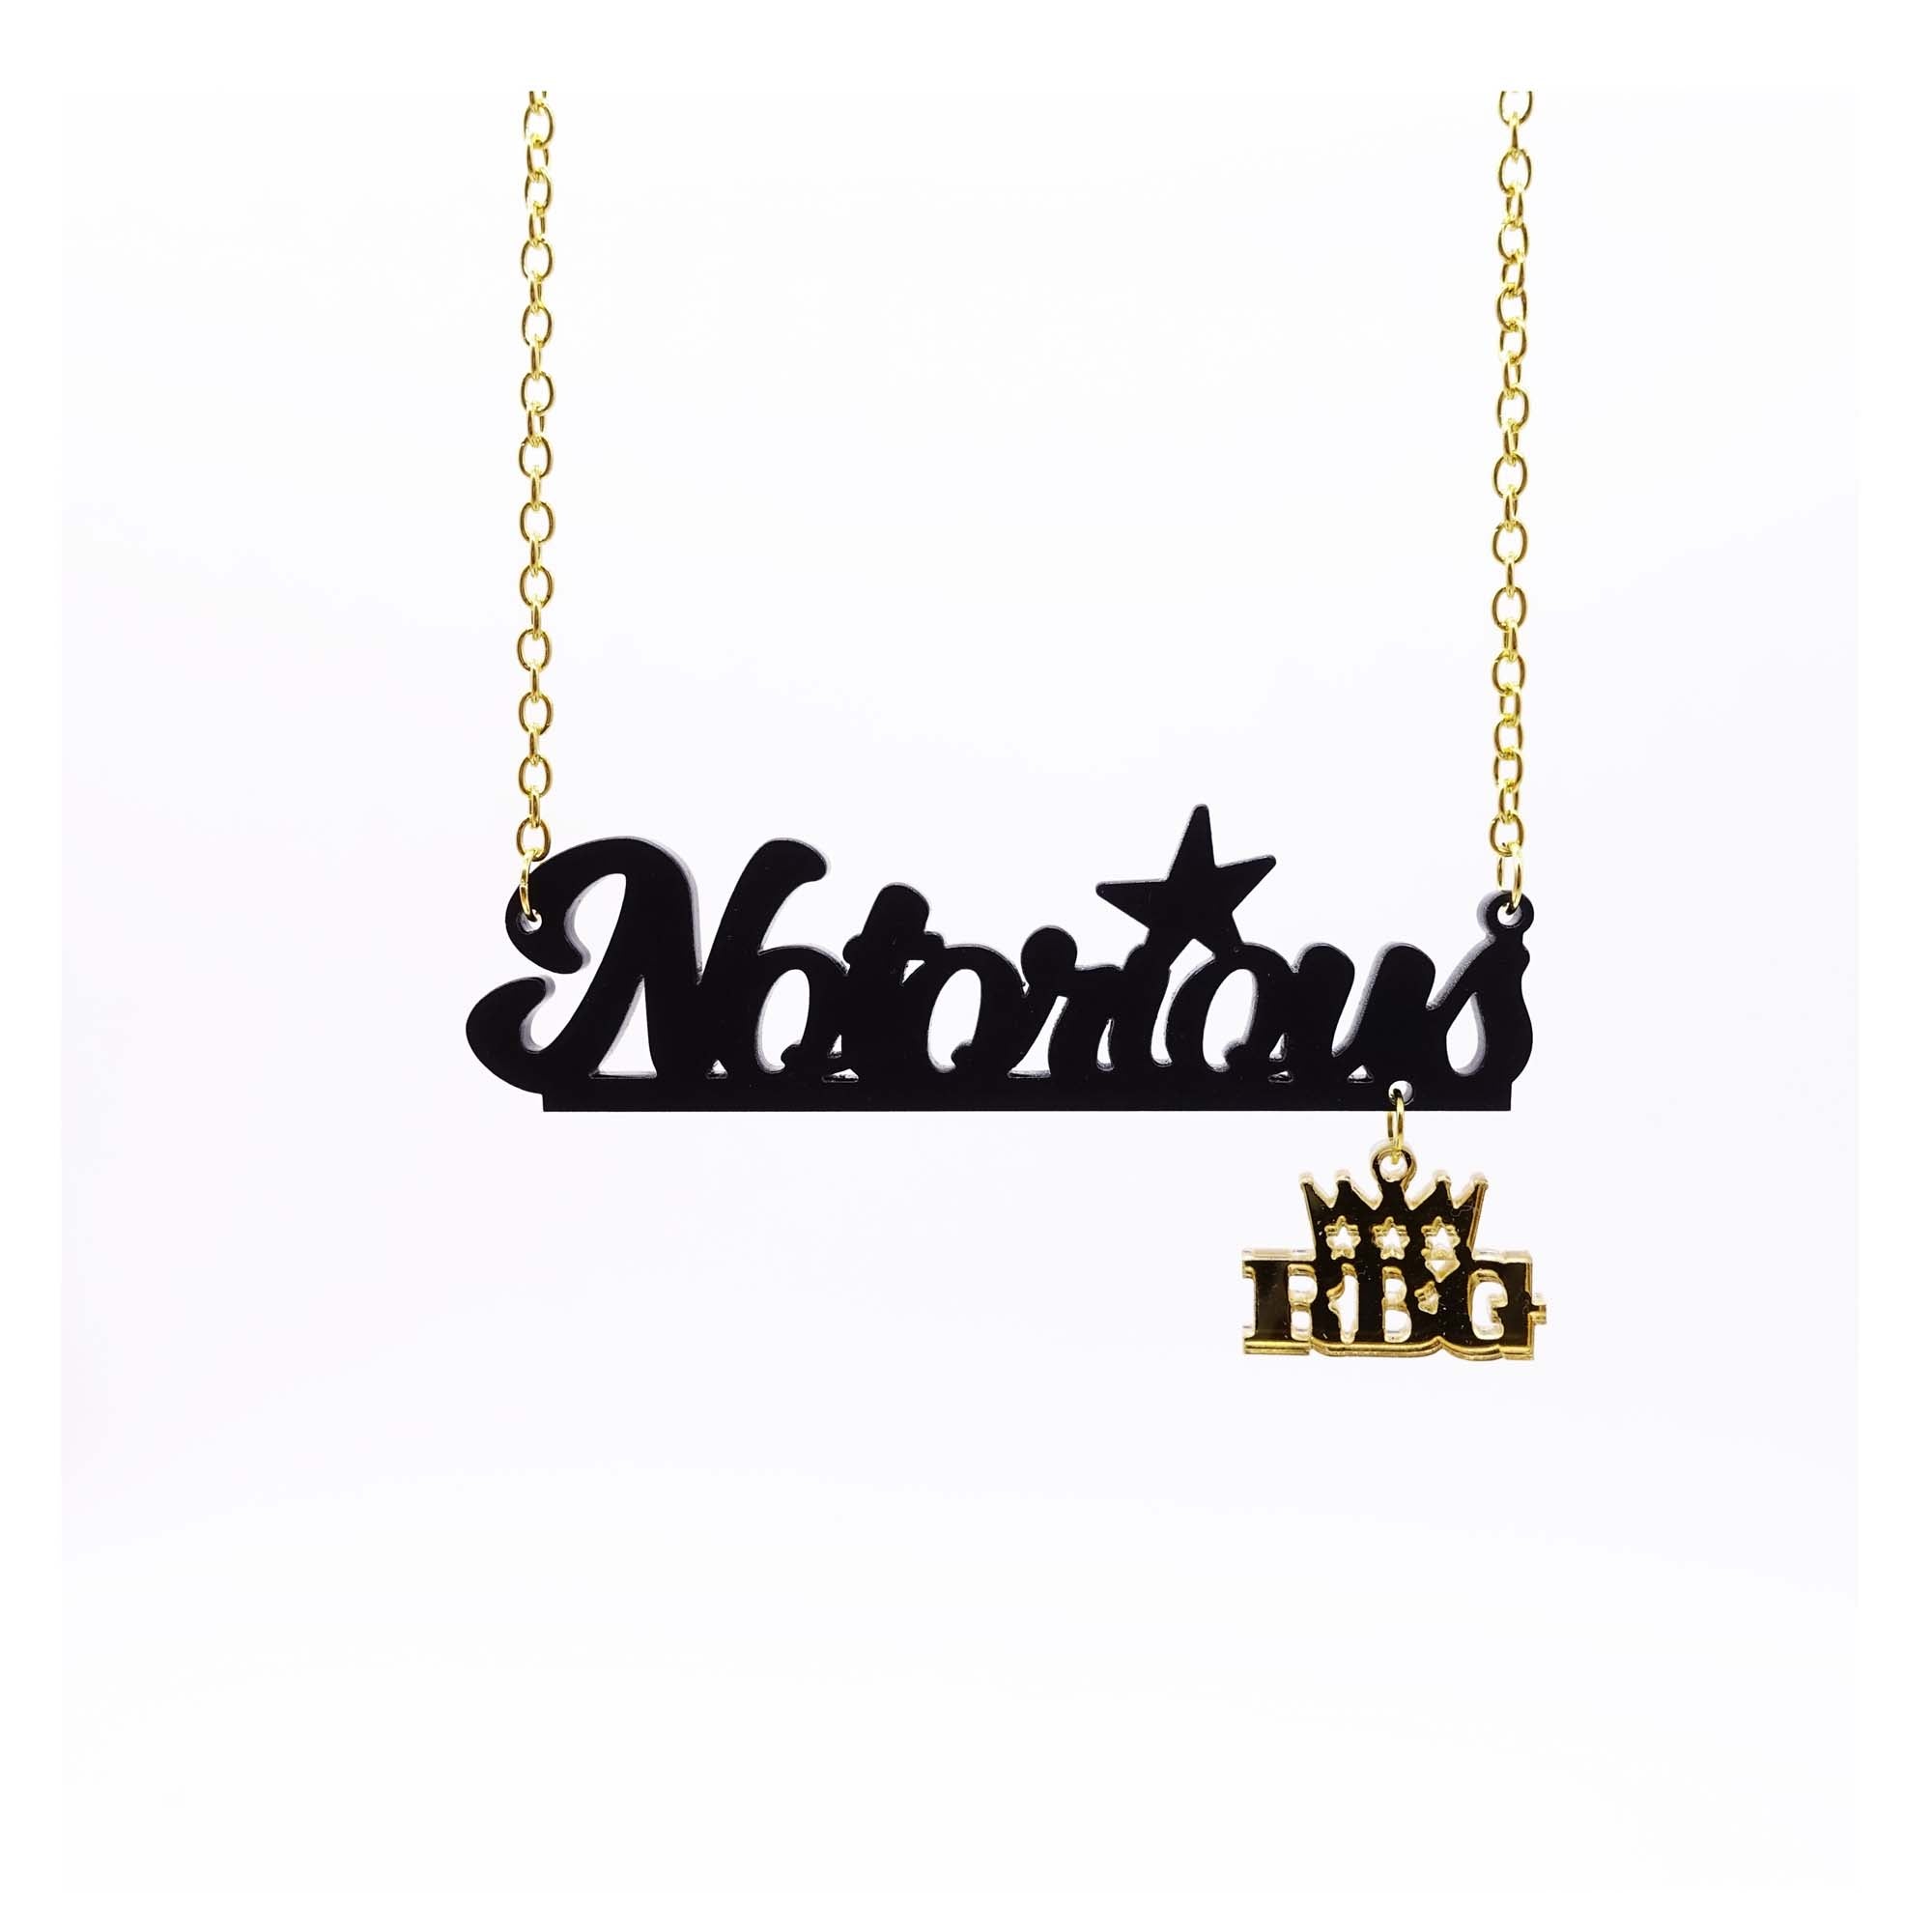 Notorious RBG necklace in matte black and gold in honour of Ruth Bader Ginsburg